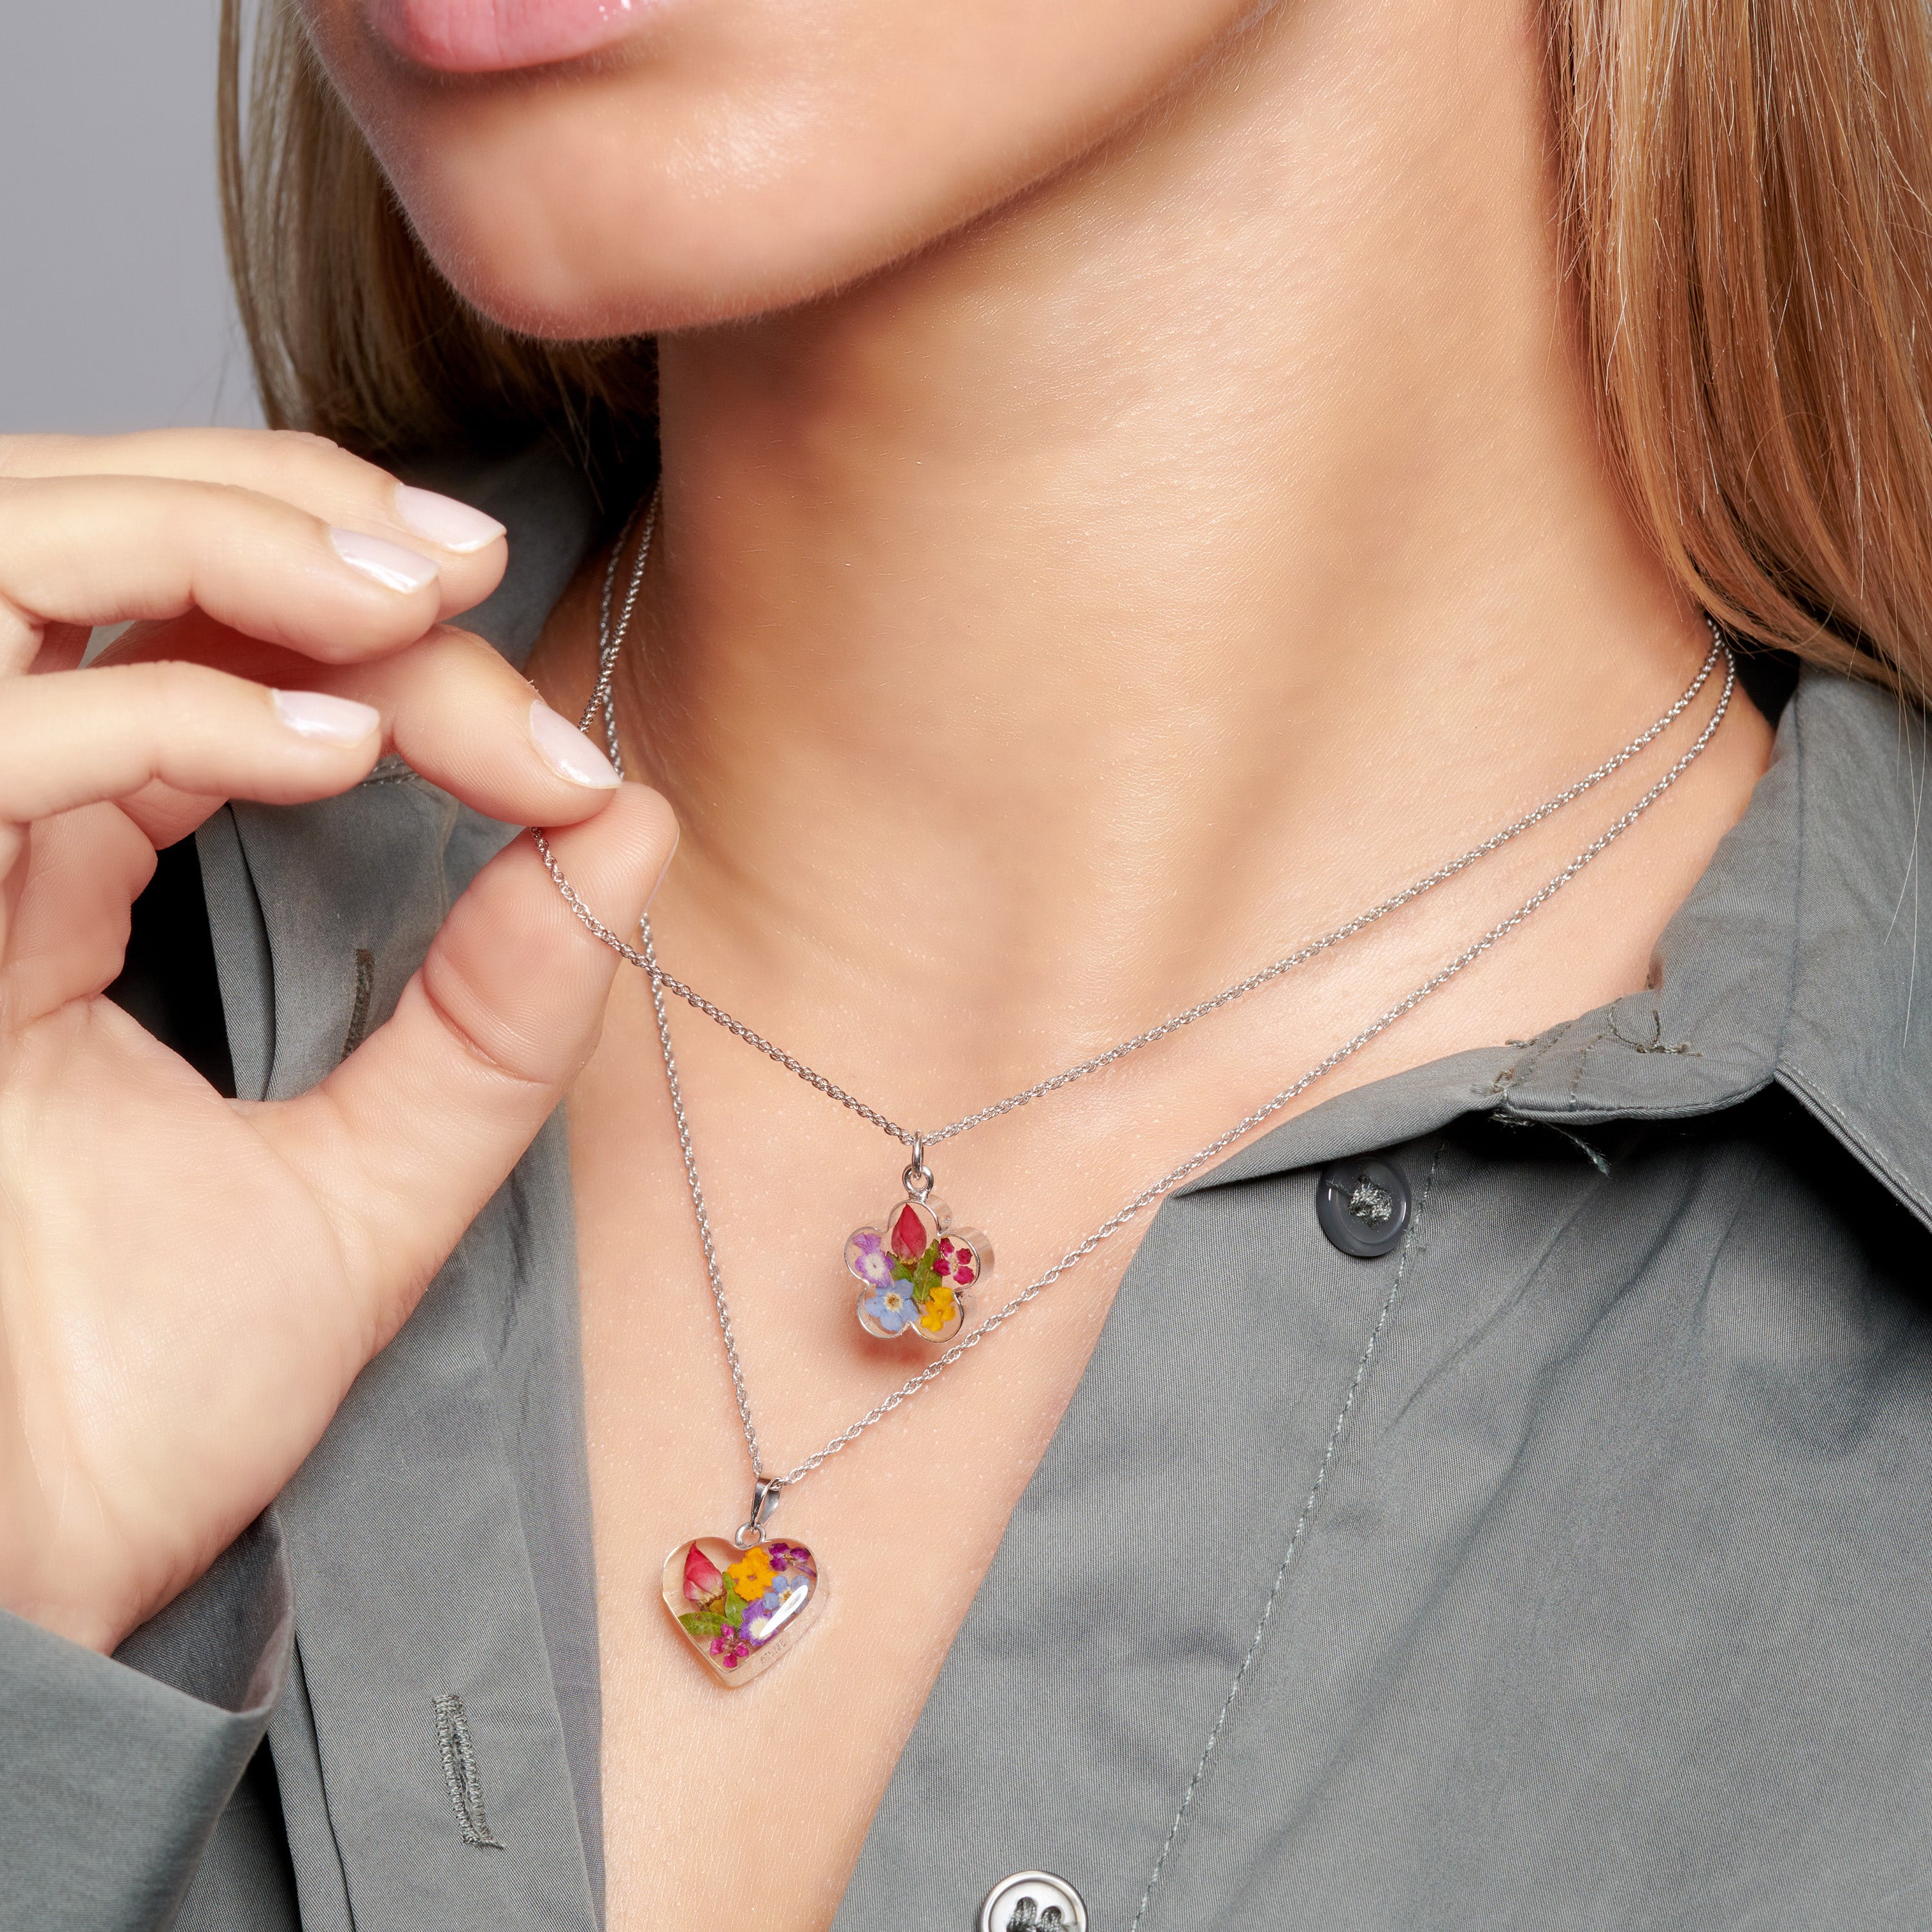 Alma Heart Necklace with Multi Colored Flowers